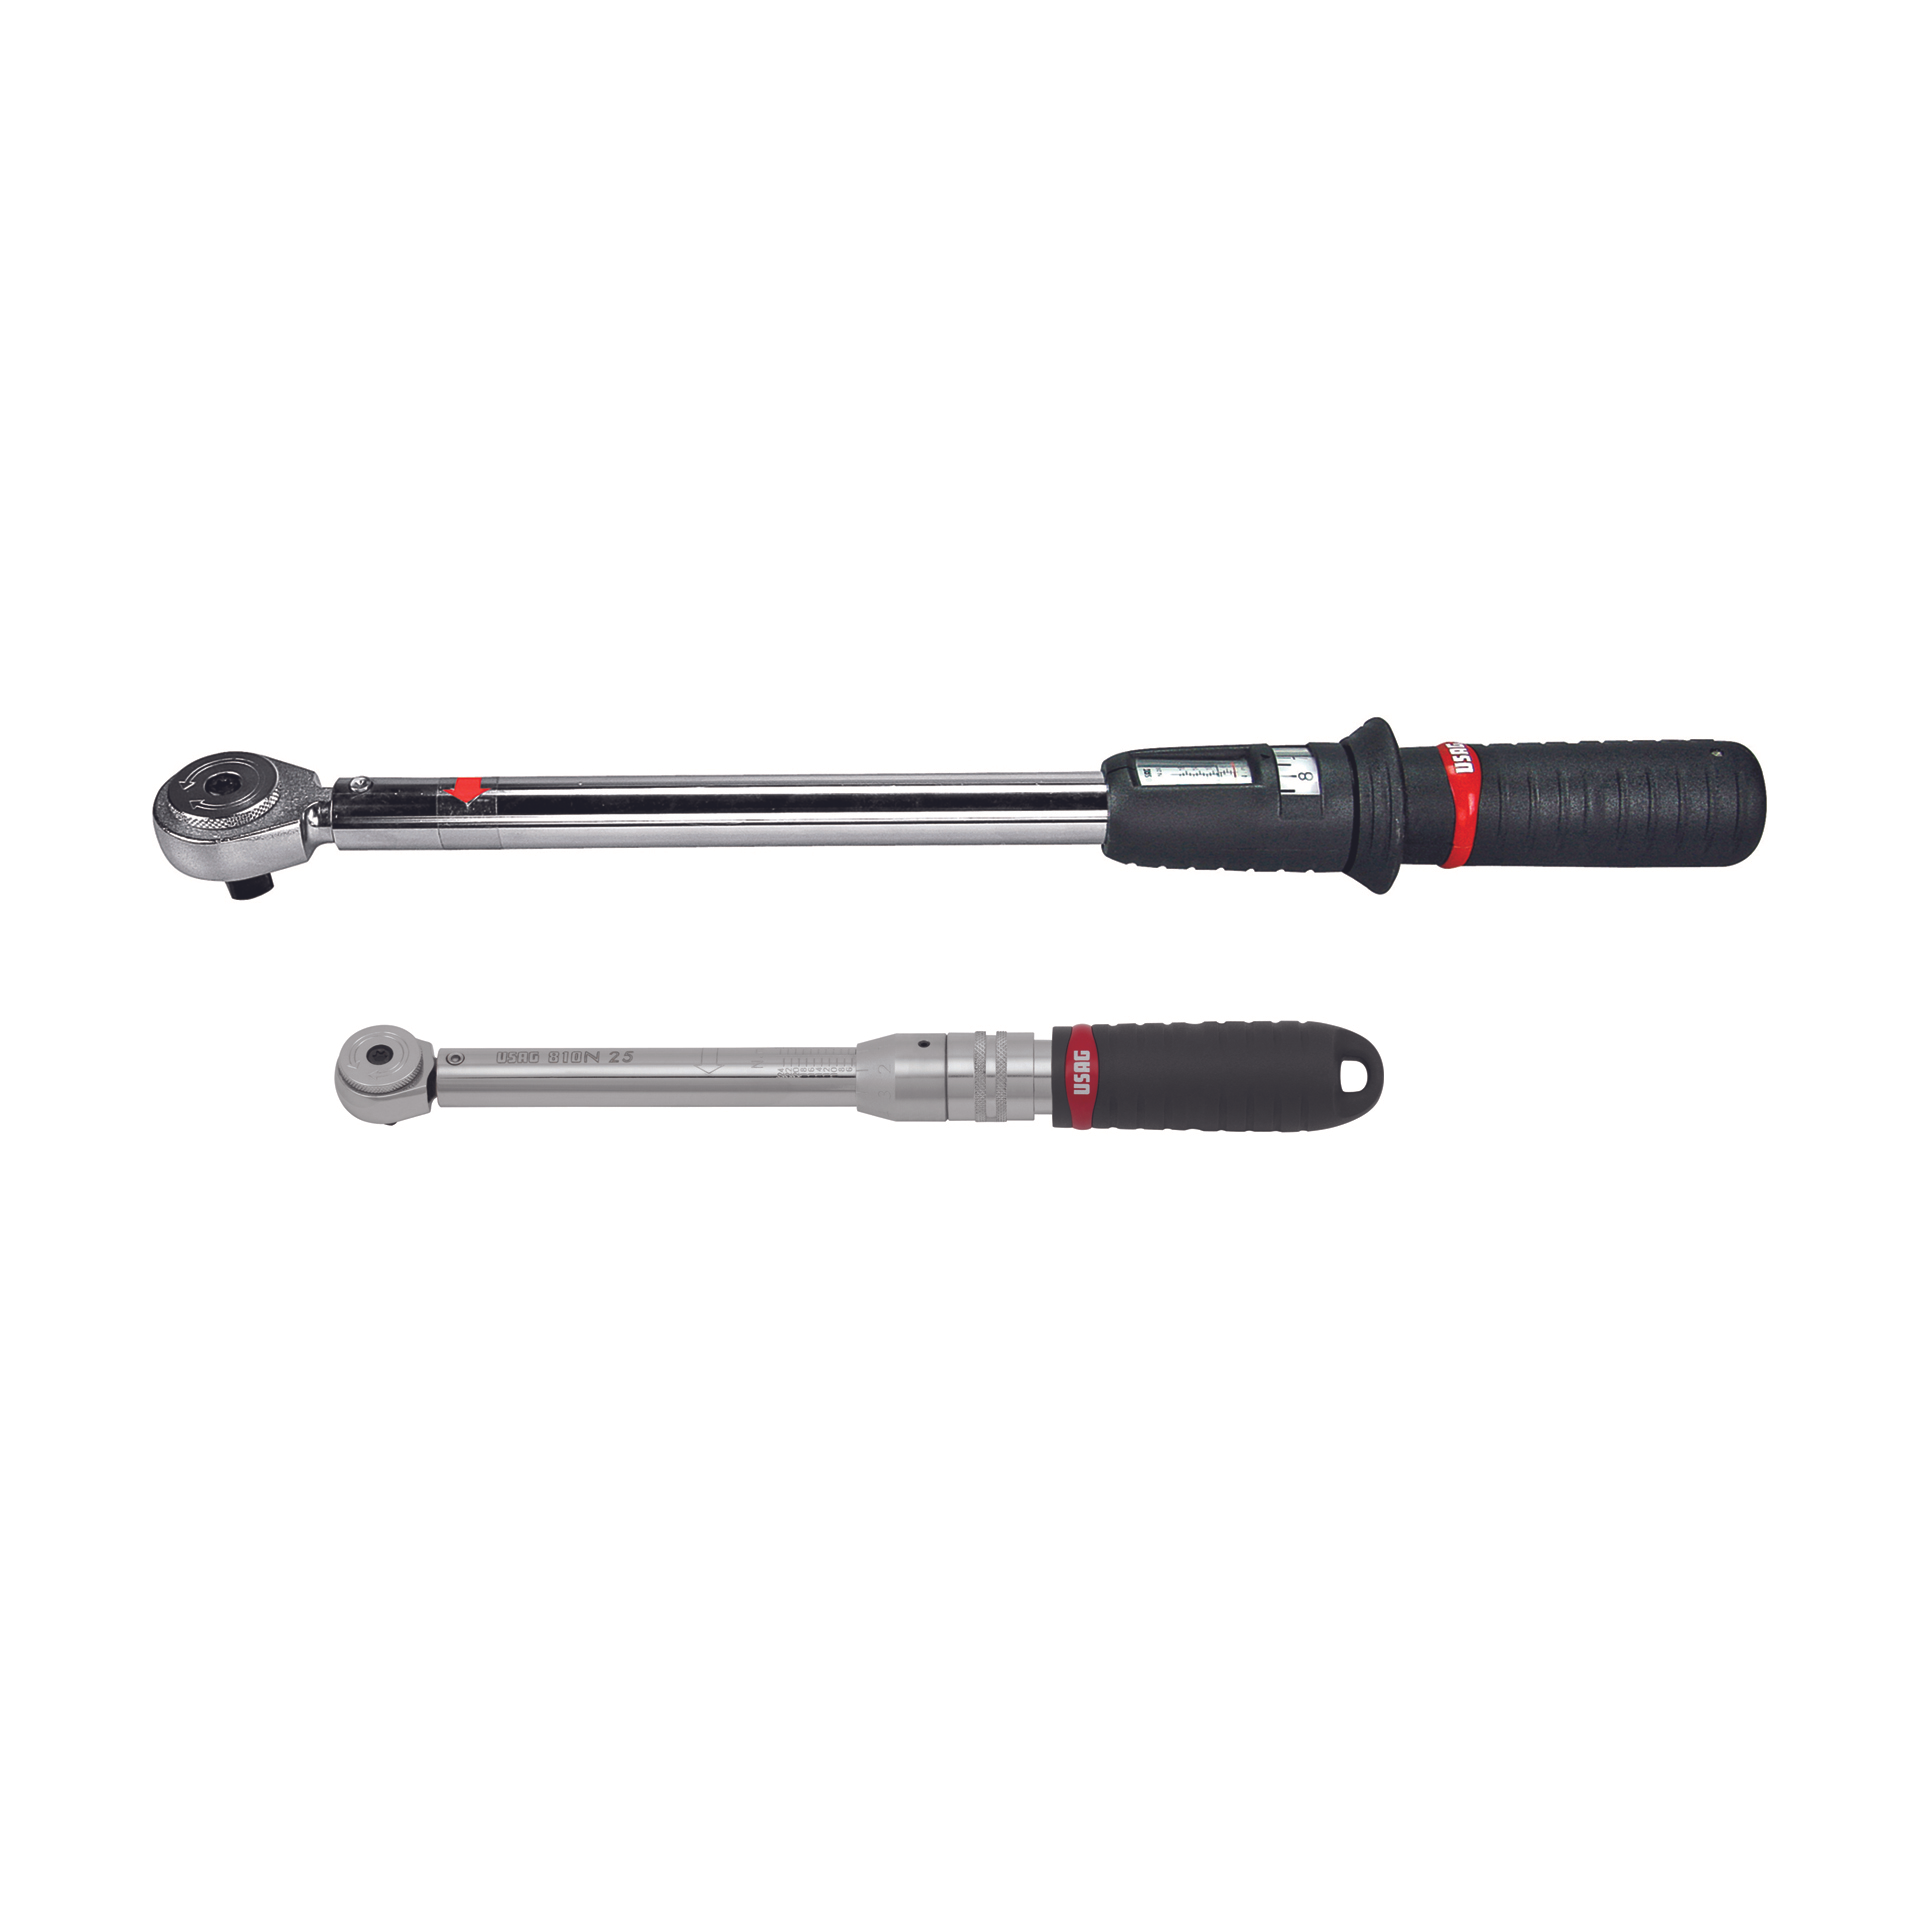 Dynamometric wrench with reversible ratchet 1/2" Nm:40200 - Usag 810 N